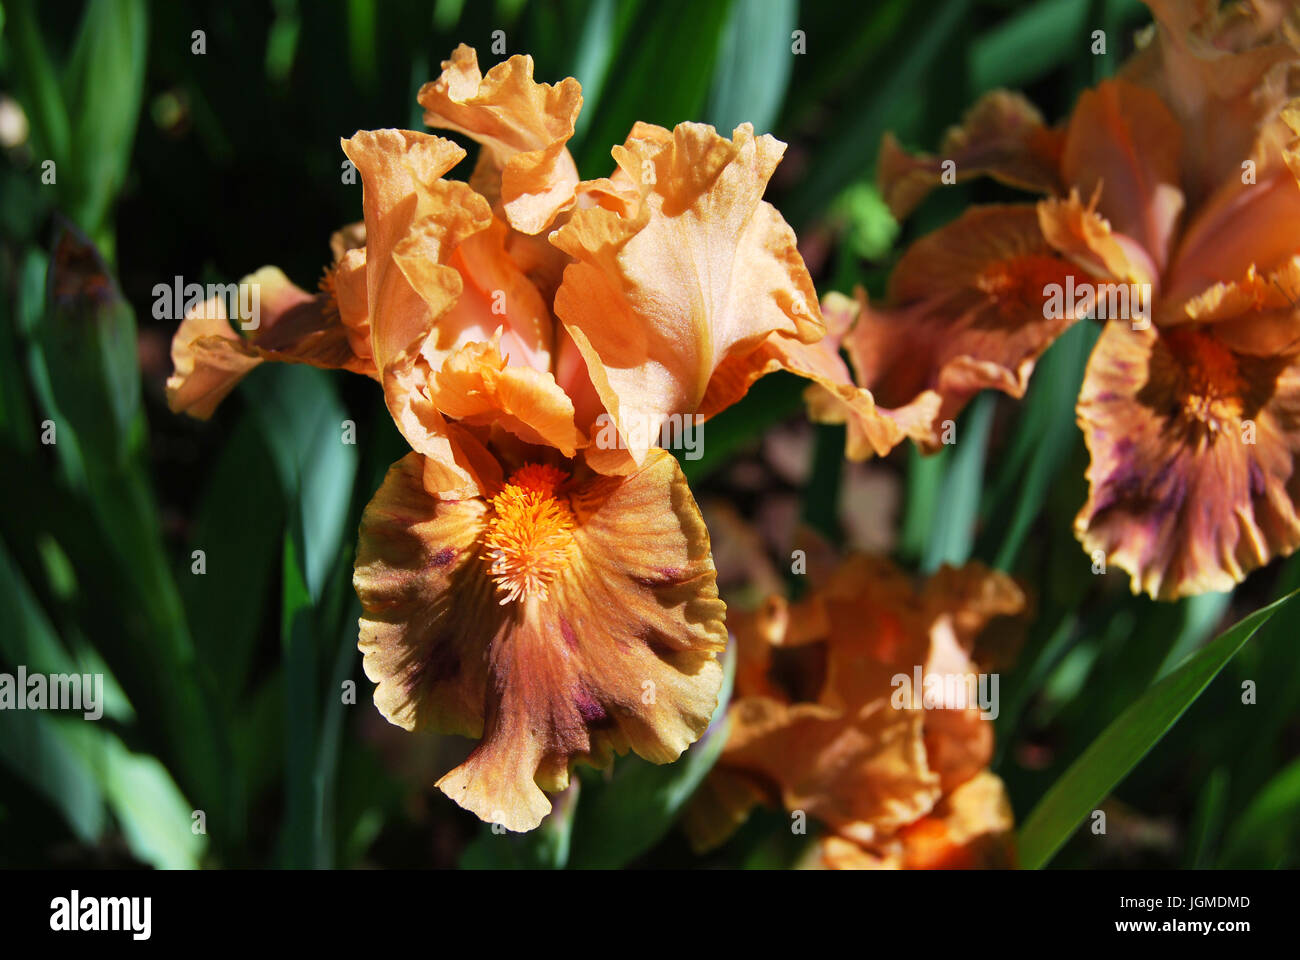 Iris, a blooming miniature peach blossom color Stock Photo